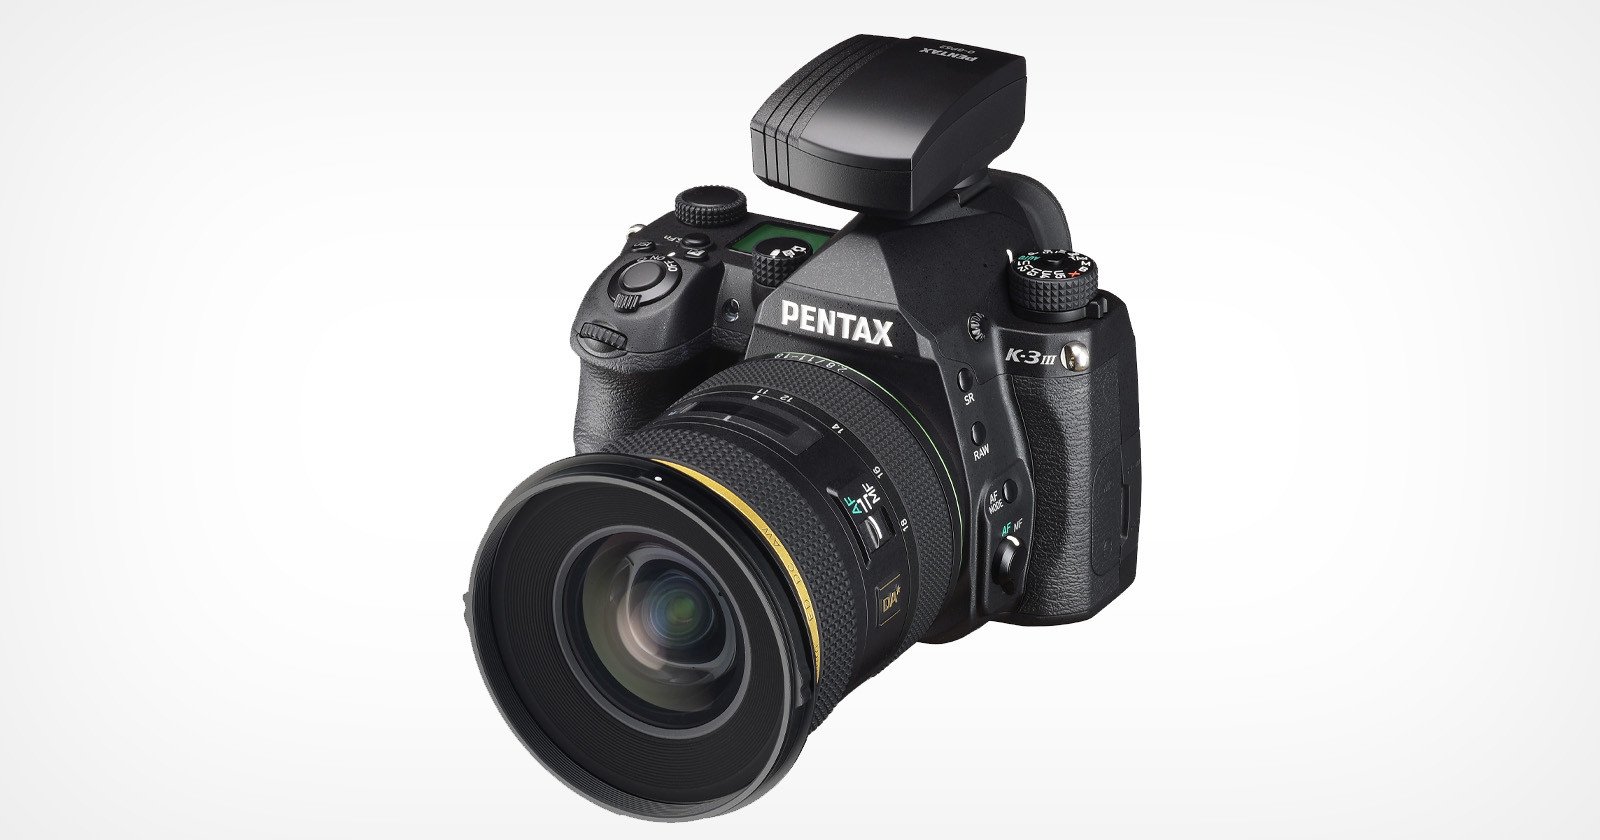 New Pentax GPS Unit Makes Astrophotography Easier and More Accurate